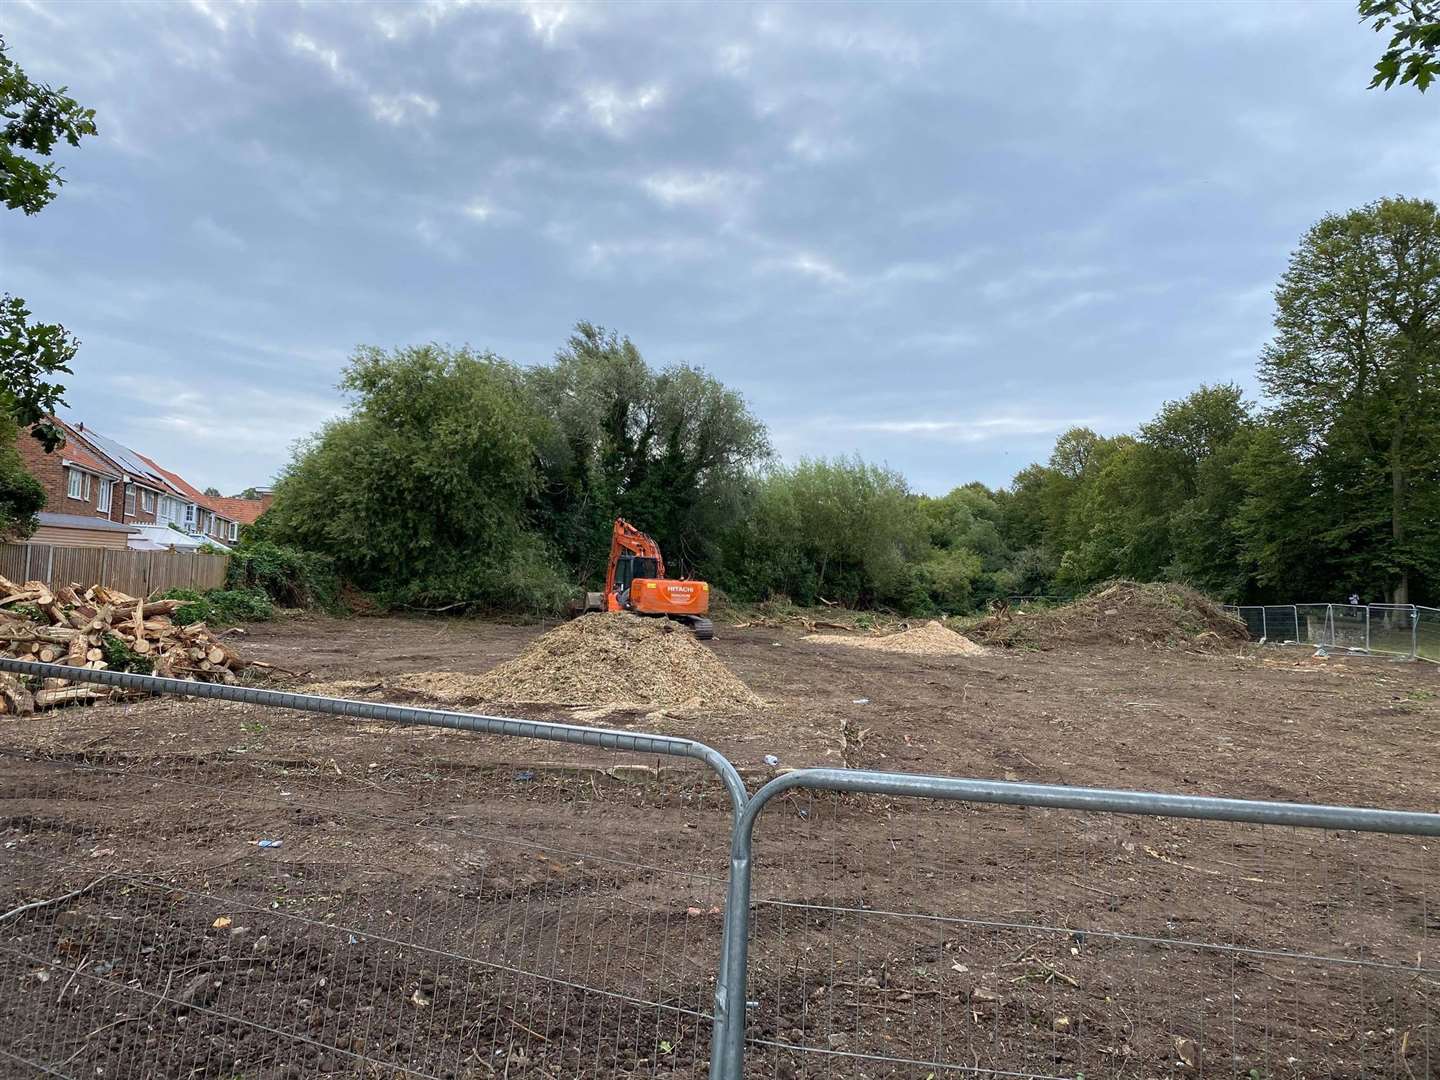 The site has been cleared of trees and bushes